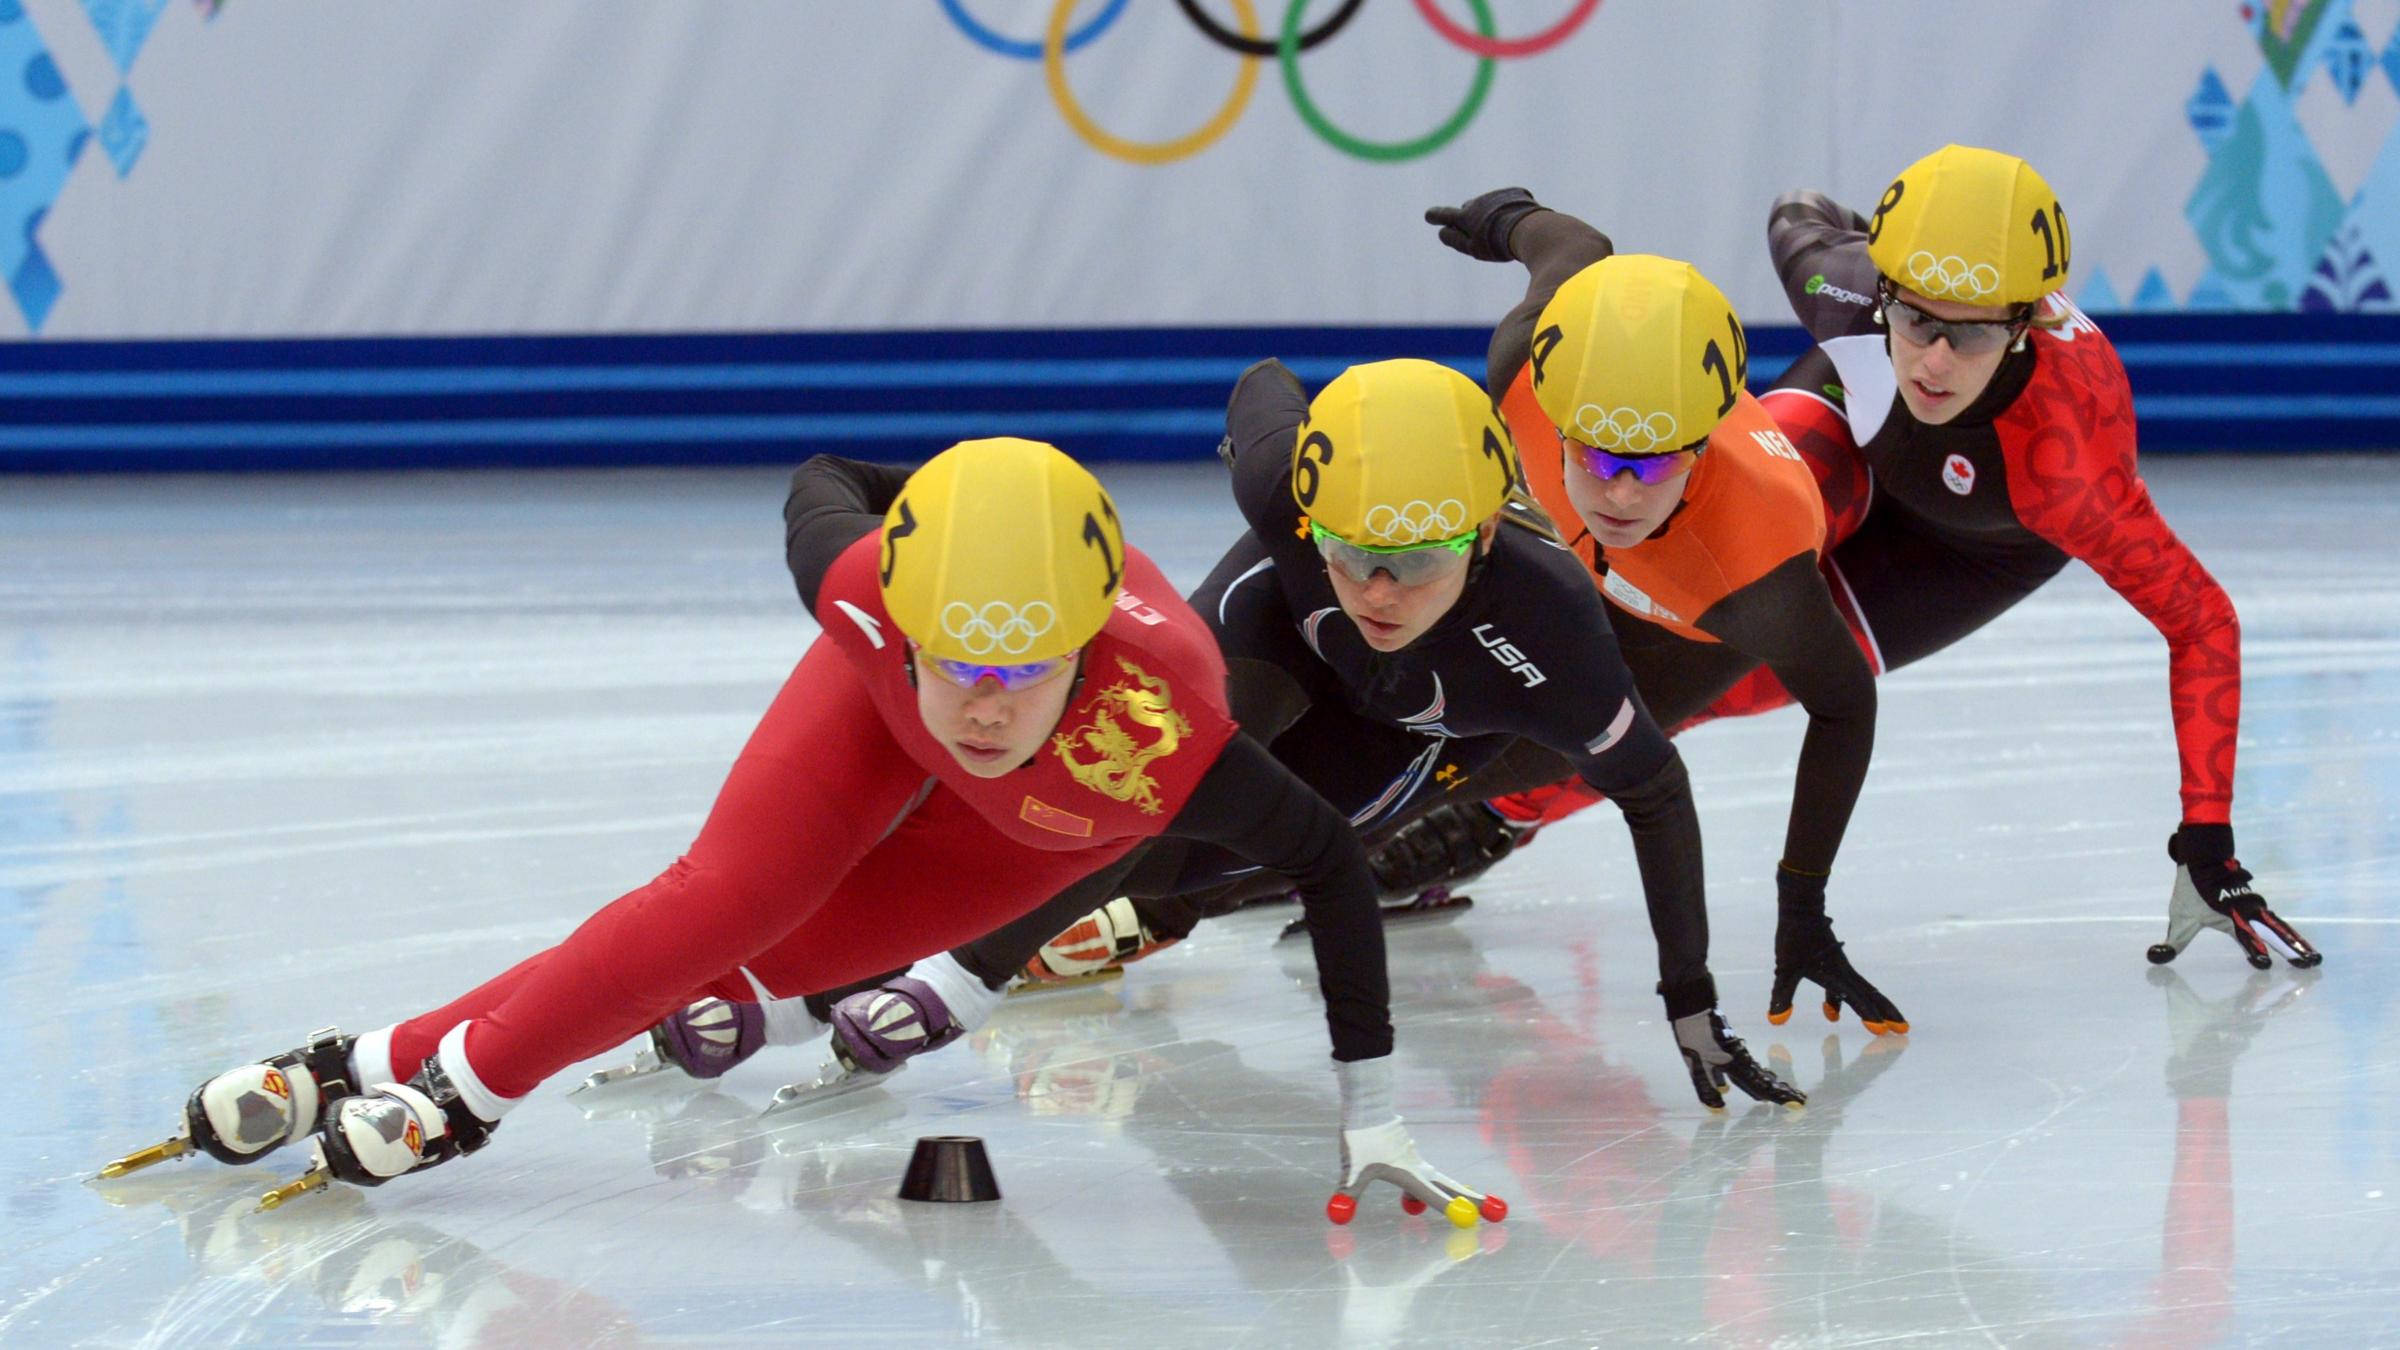 s. olympic committee plans to examine speedskating"s woes